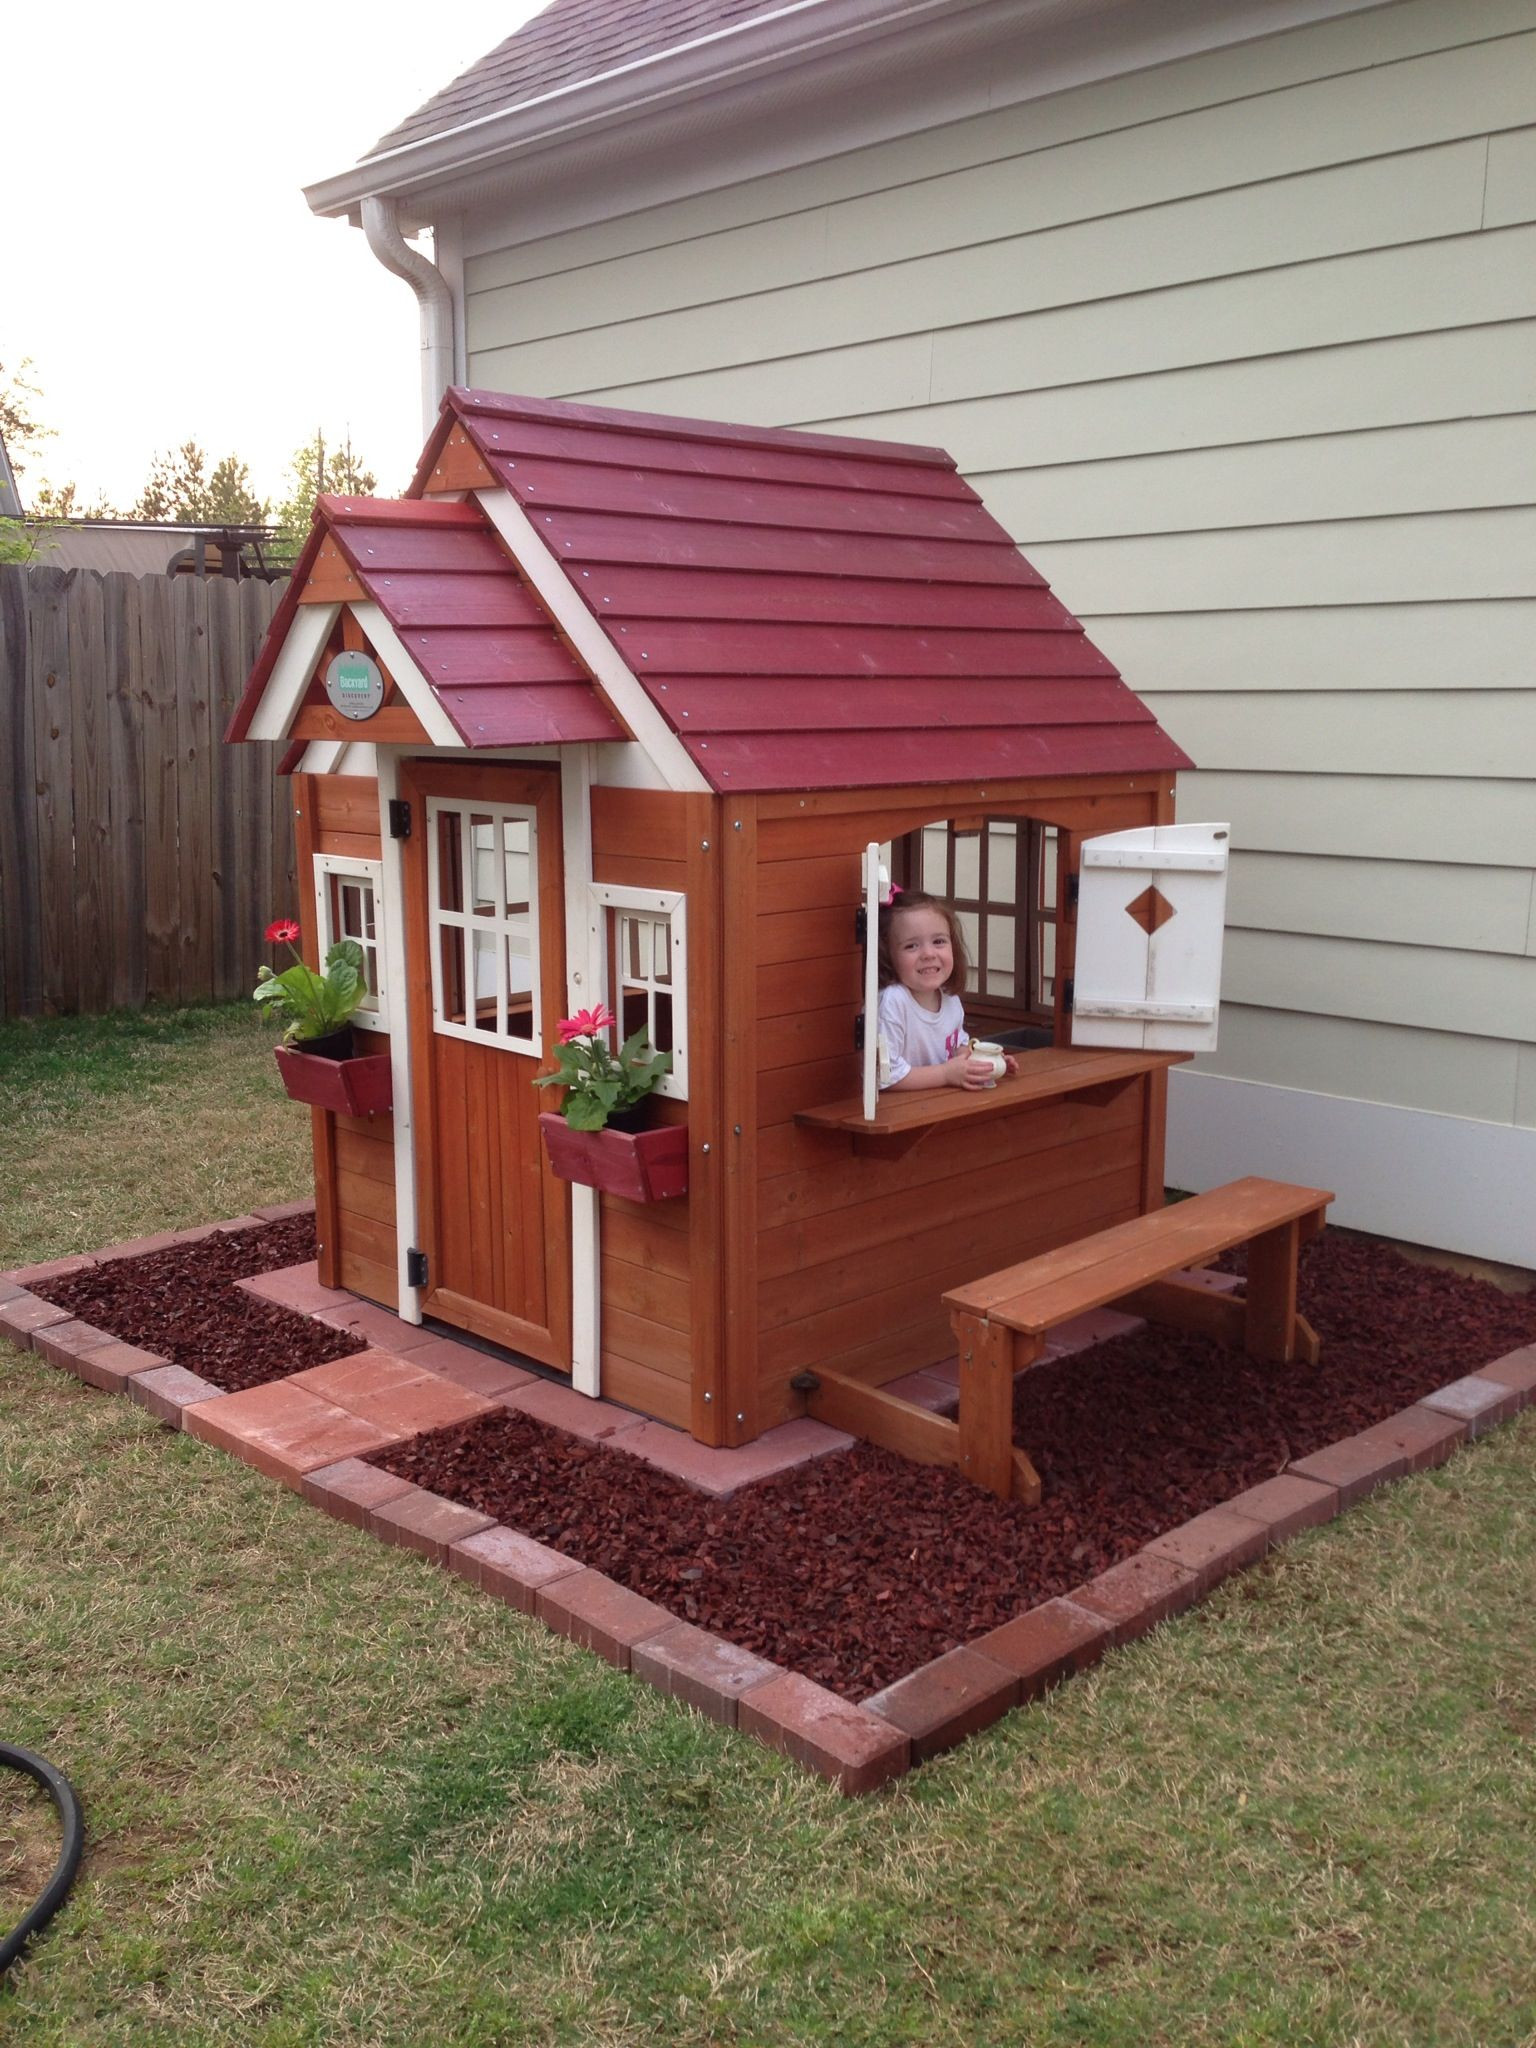 Outdoor Playhouse For Kids
 Playhouse idea Had so much fun doing it